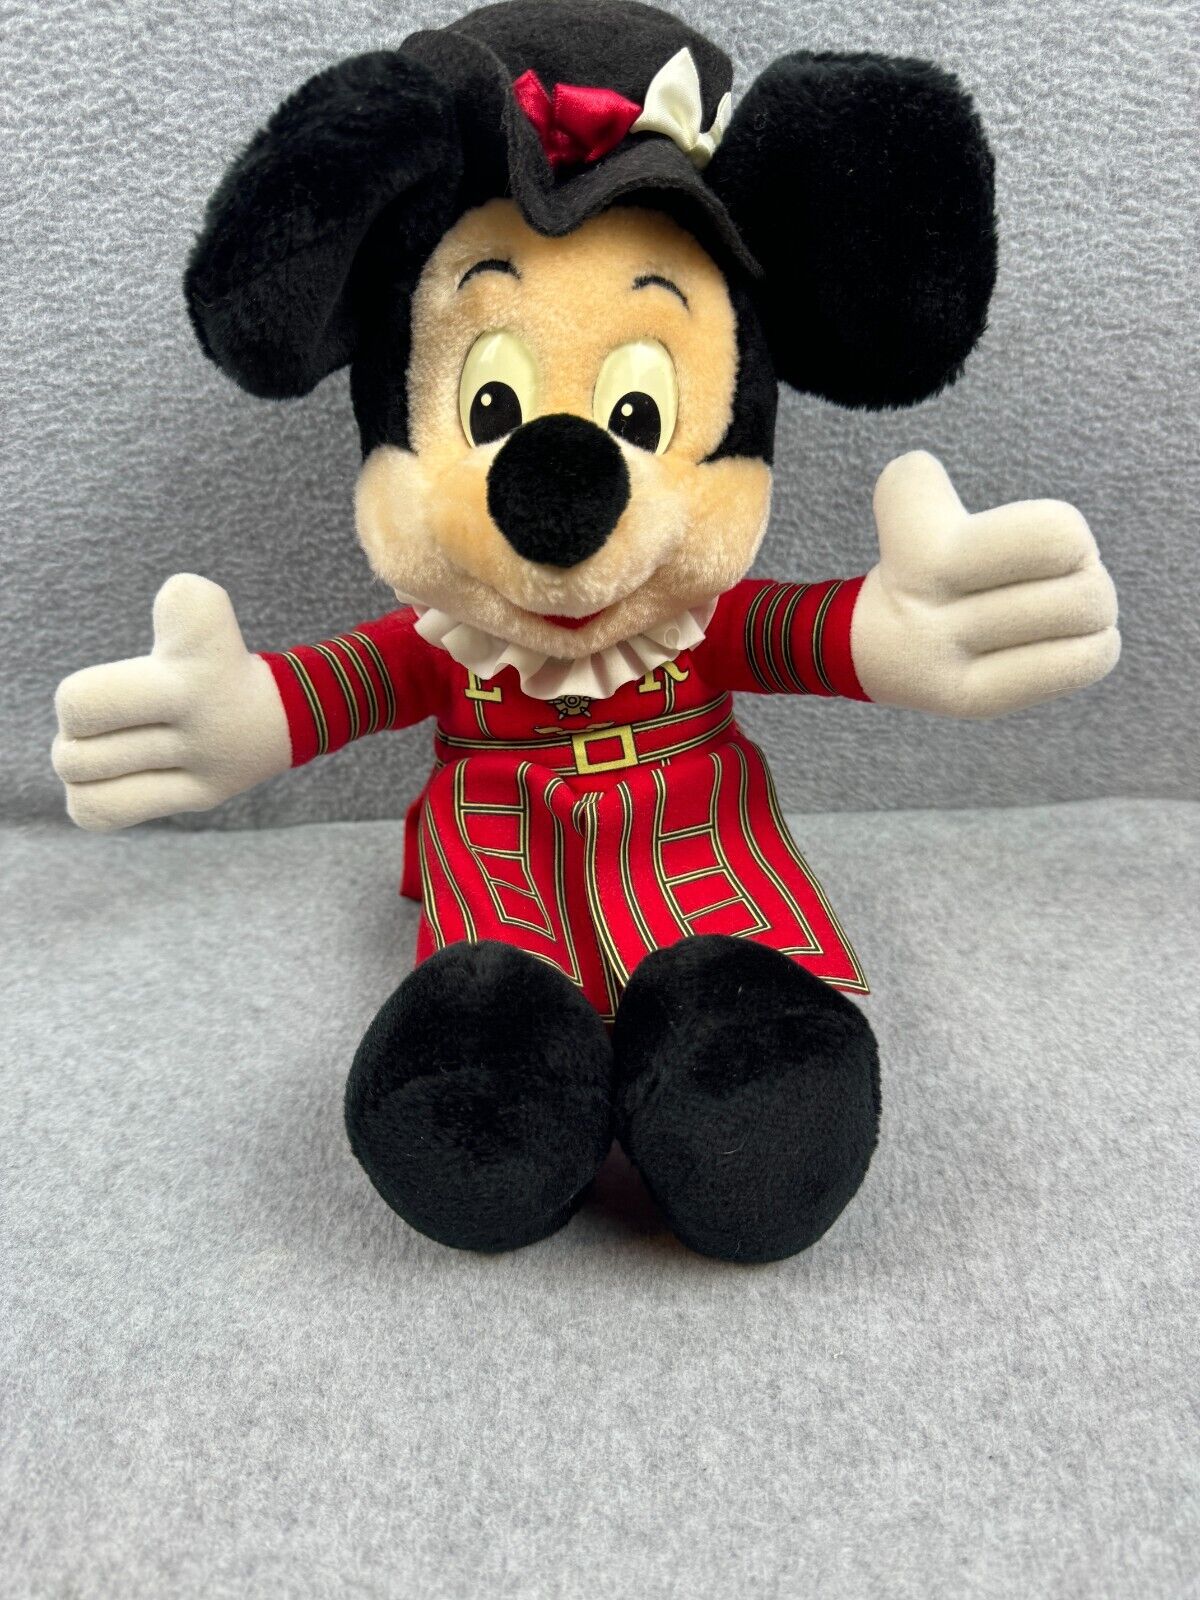 Disney Mickey Mouse Beefeater Plush - ER on Uniform - Fabric Tag